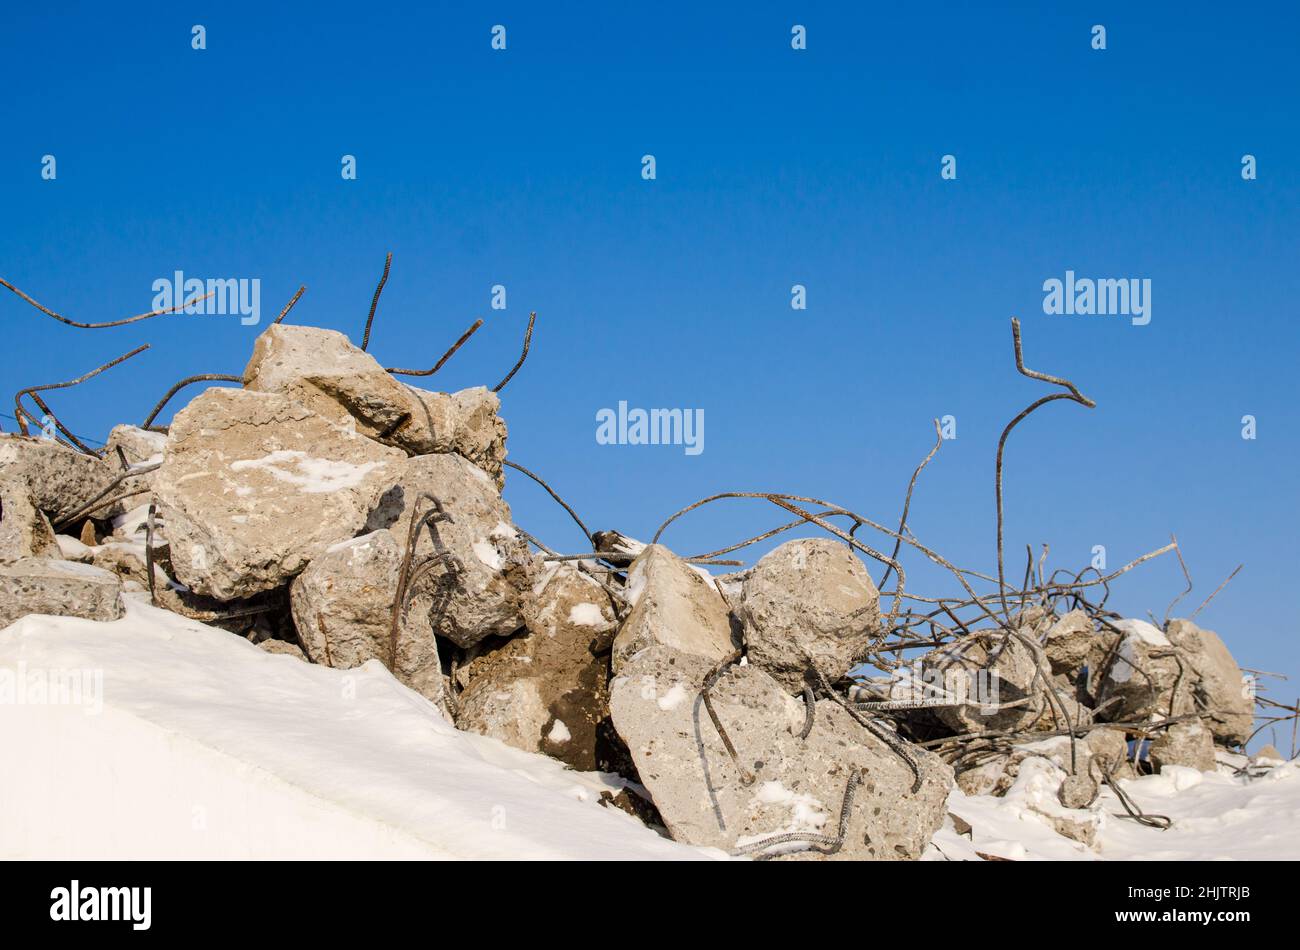 Pieces of concrete with reinforcement from destroyed structures. Stock Photo